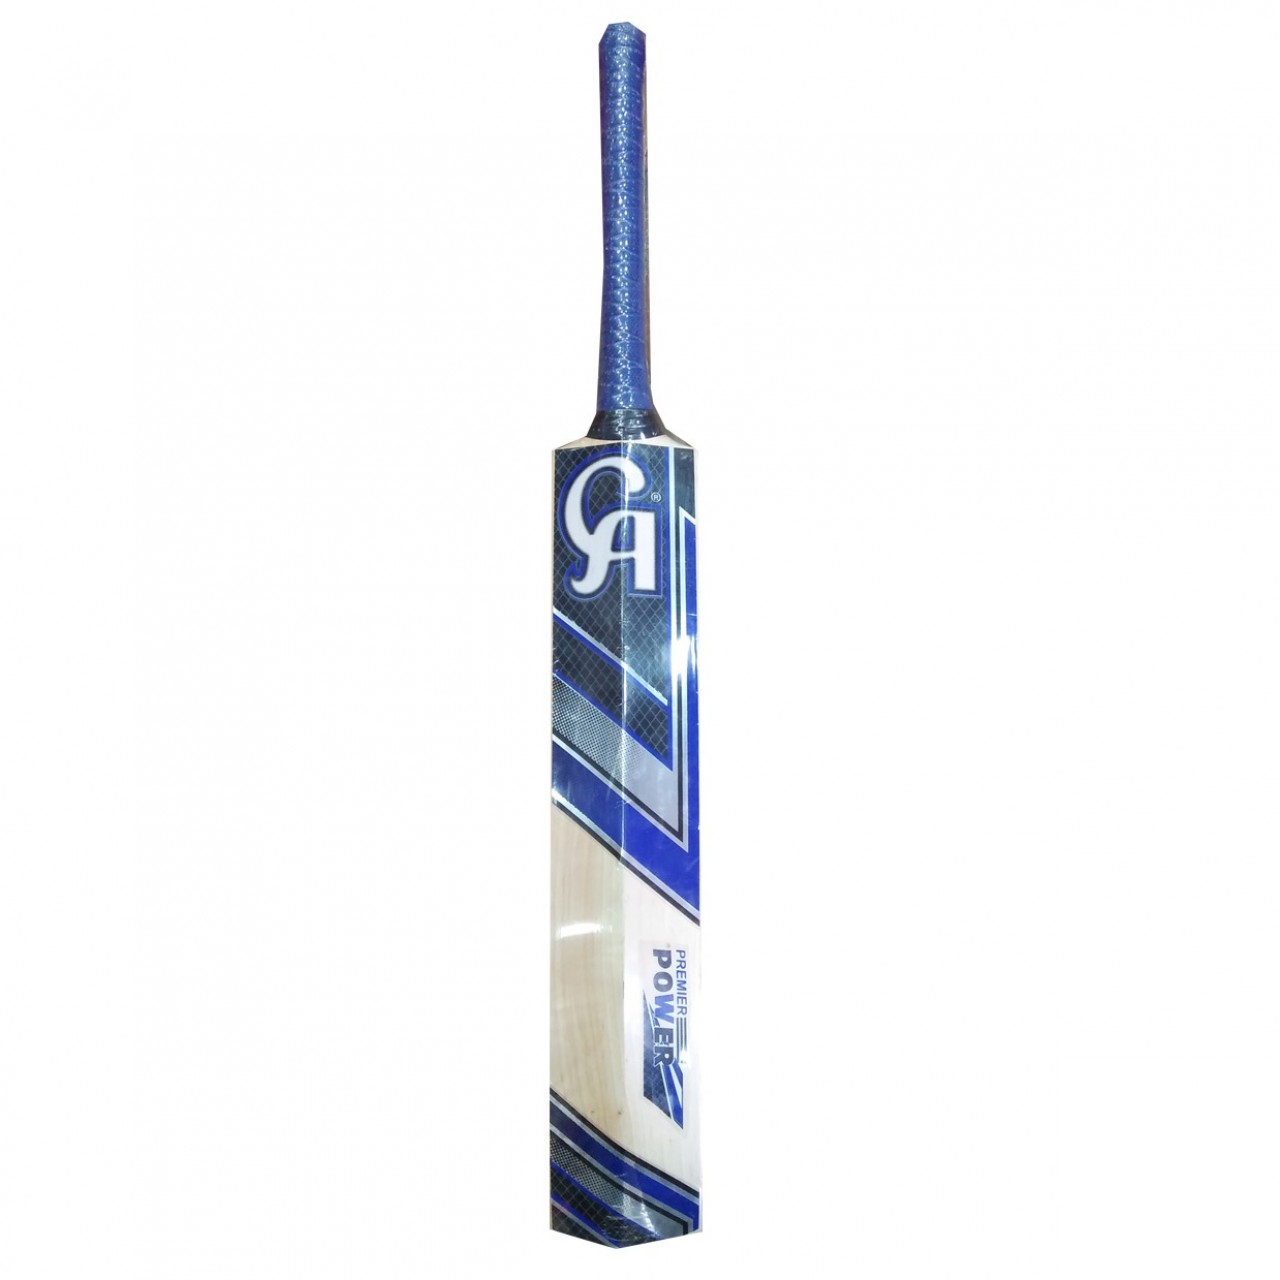 CA Premier Power Cricket Bat - Made of English Willow